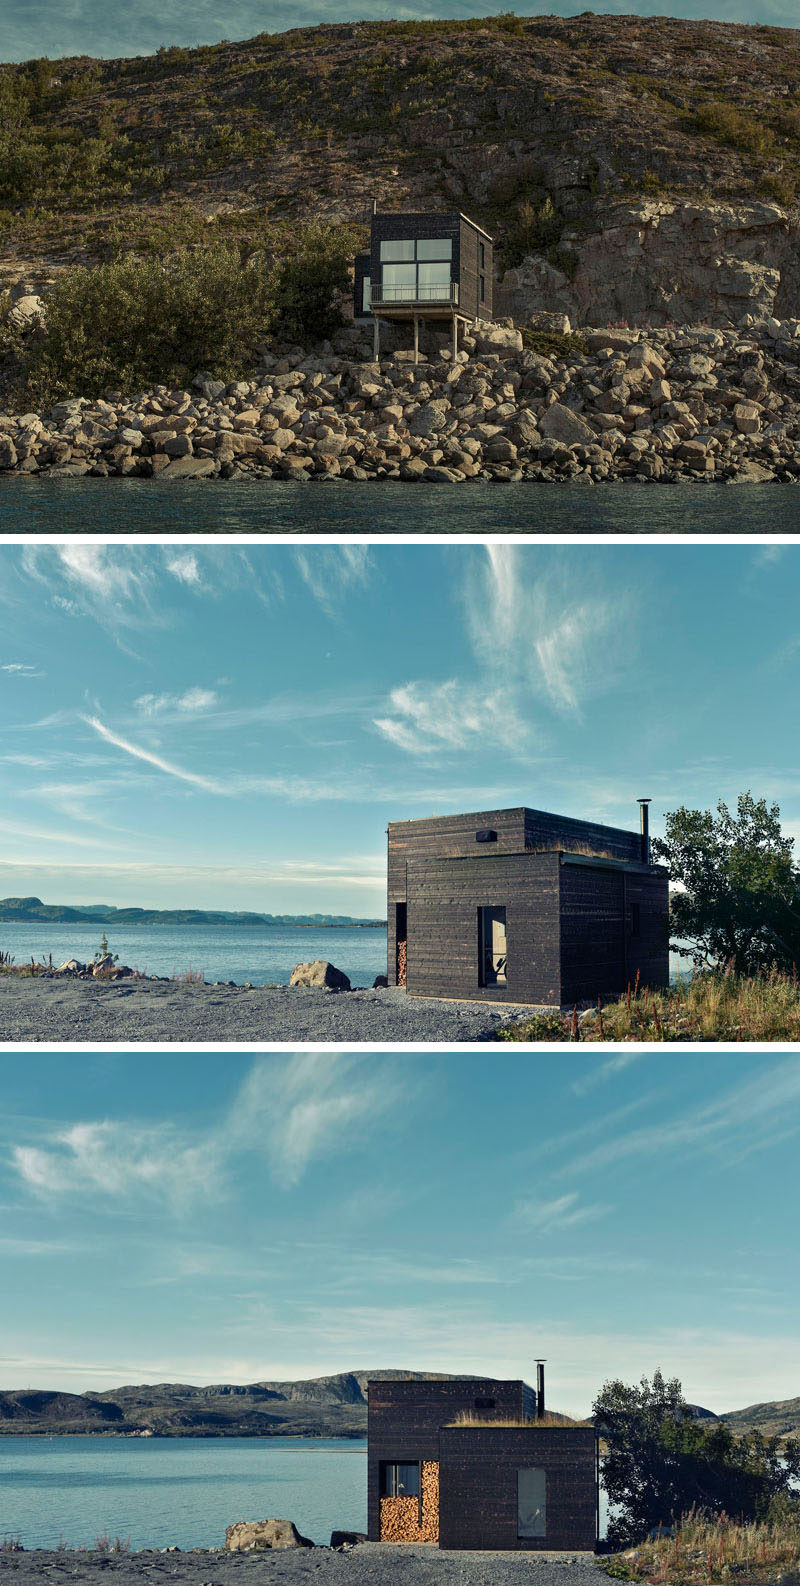 Charred wood siding and a green roof cover this small home on the coastline of Norway.